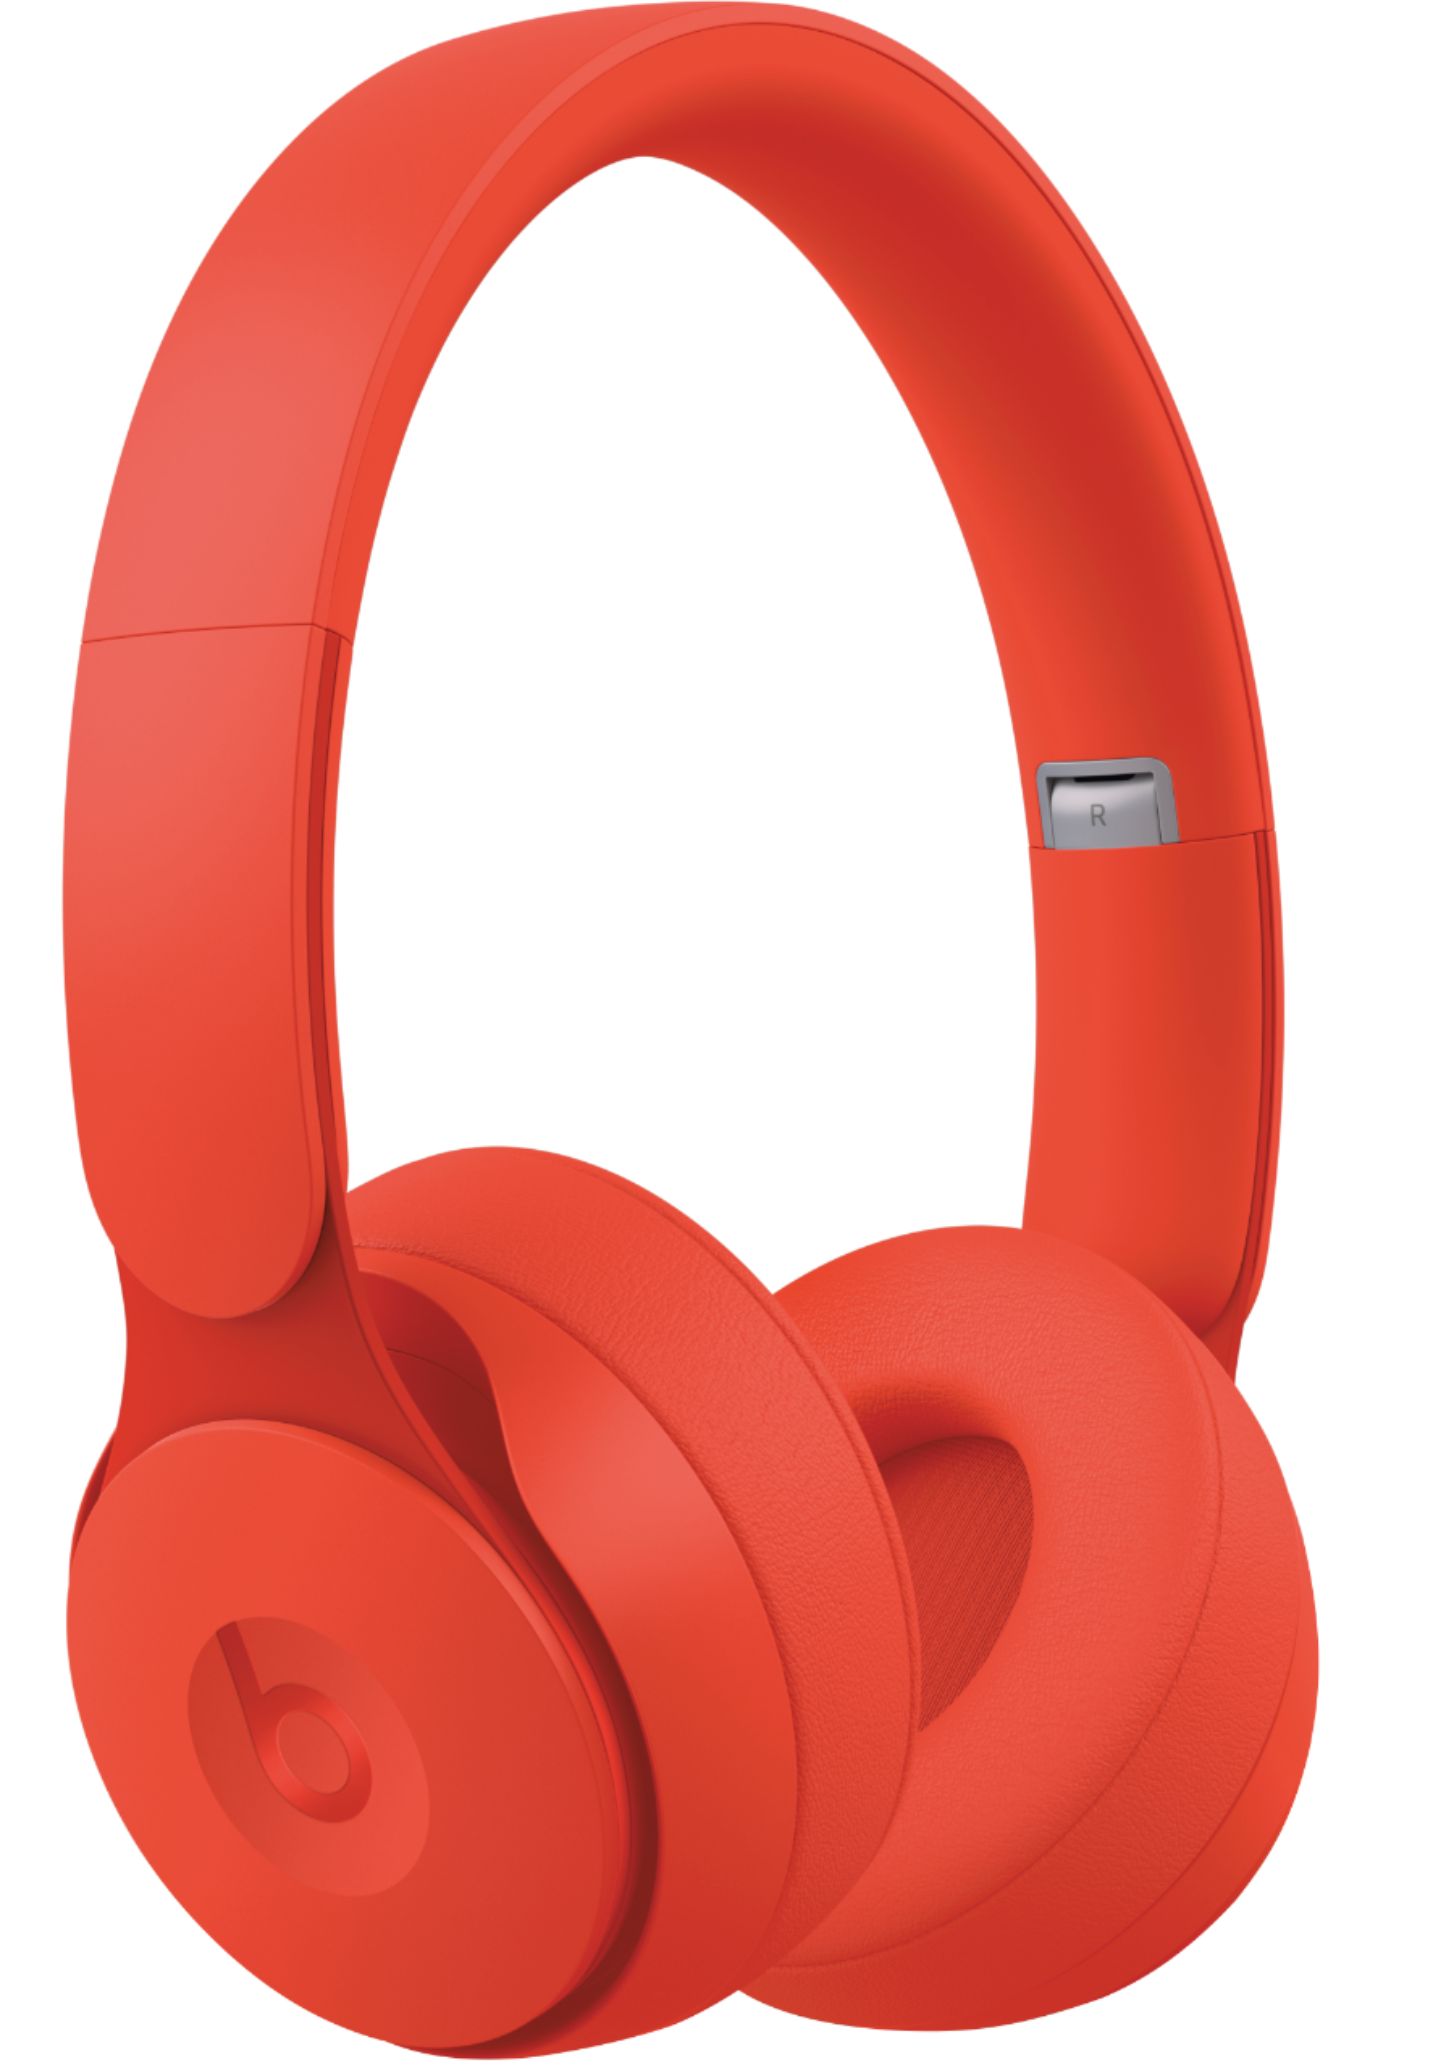 Beats by Dr. Dre Solo Pro More Matte Collection Wireless Noise Cancelling  On-Ear Headphones Red MRJC2LL/A - Best Buy